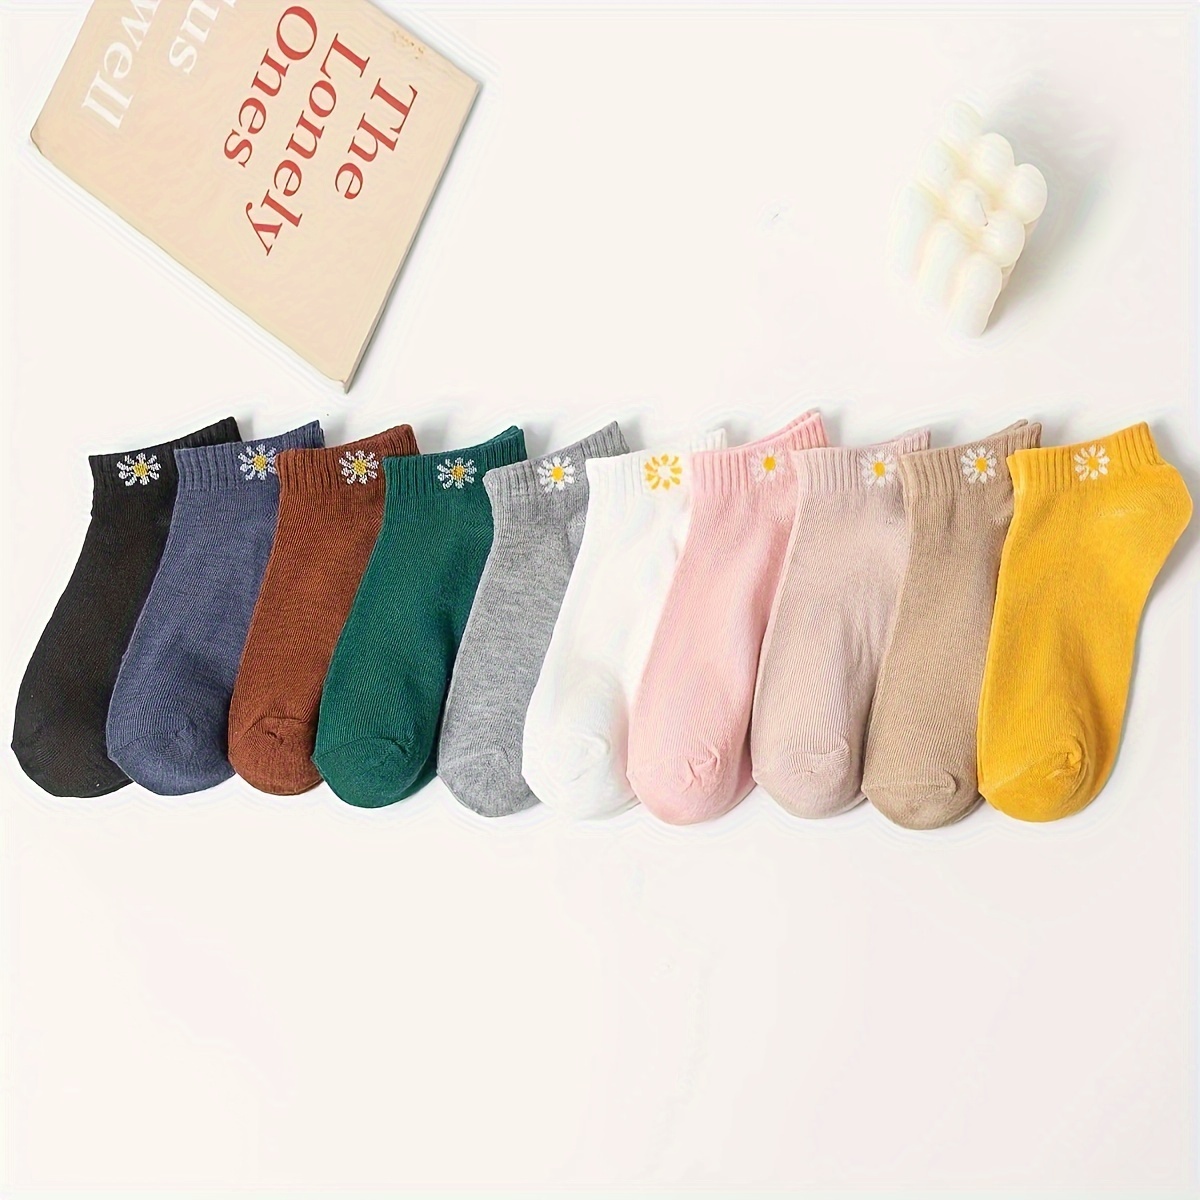 

10 Pairs Of Girls' Short Socks With Daisy Patterns - Cotton, Polyester, And Elastane Blend - Suitable For Teens - Machine Washable - Seasonal - Knit Fabric - Not Above Knee